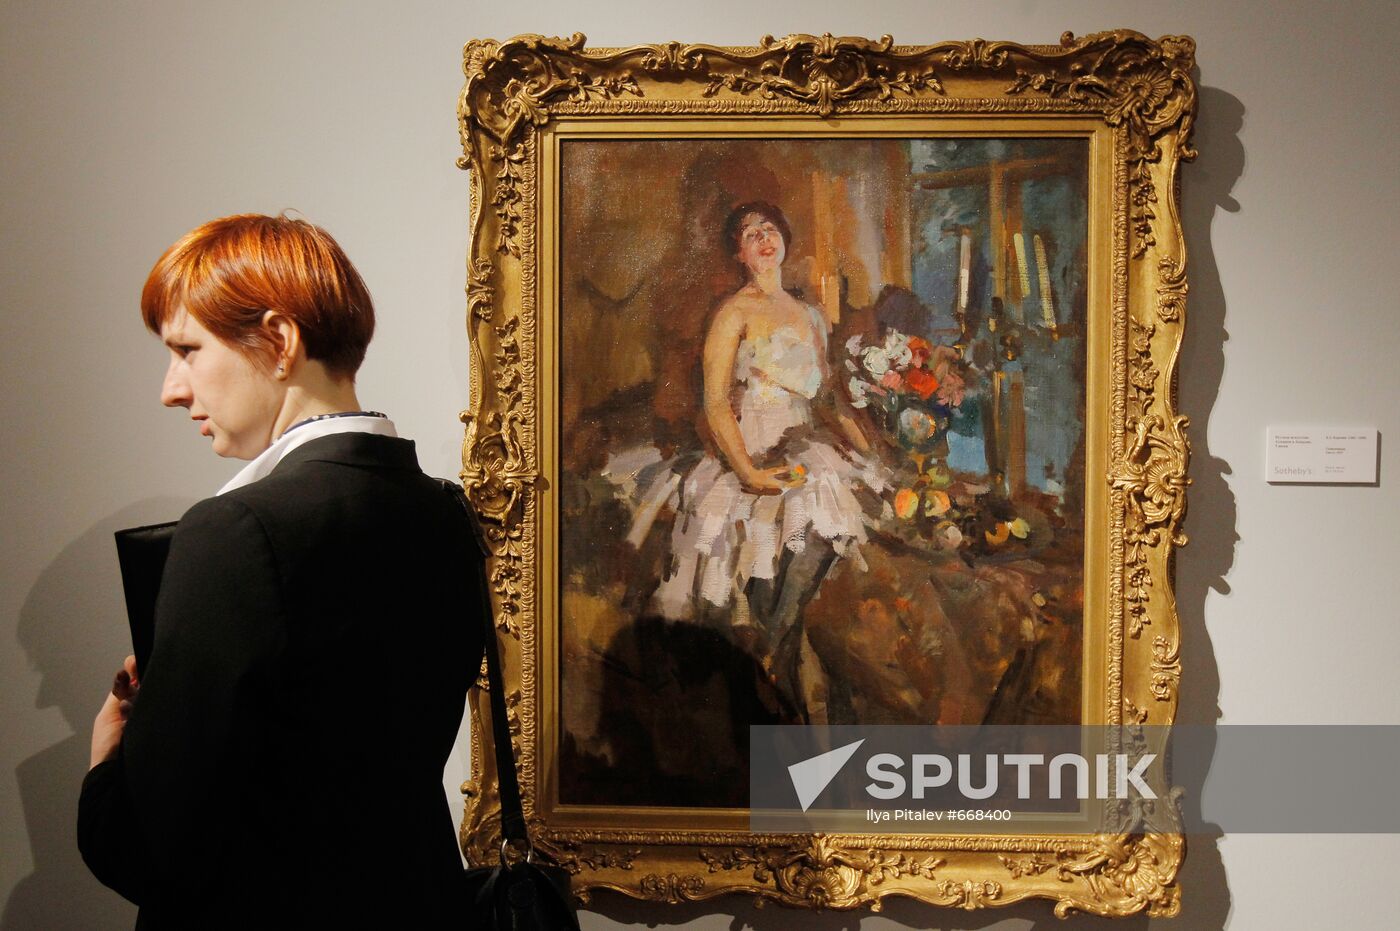 Sotheby's pre-auction exhibition